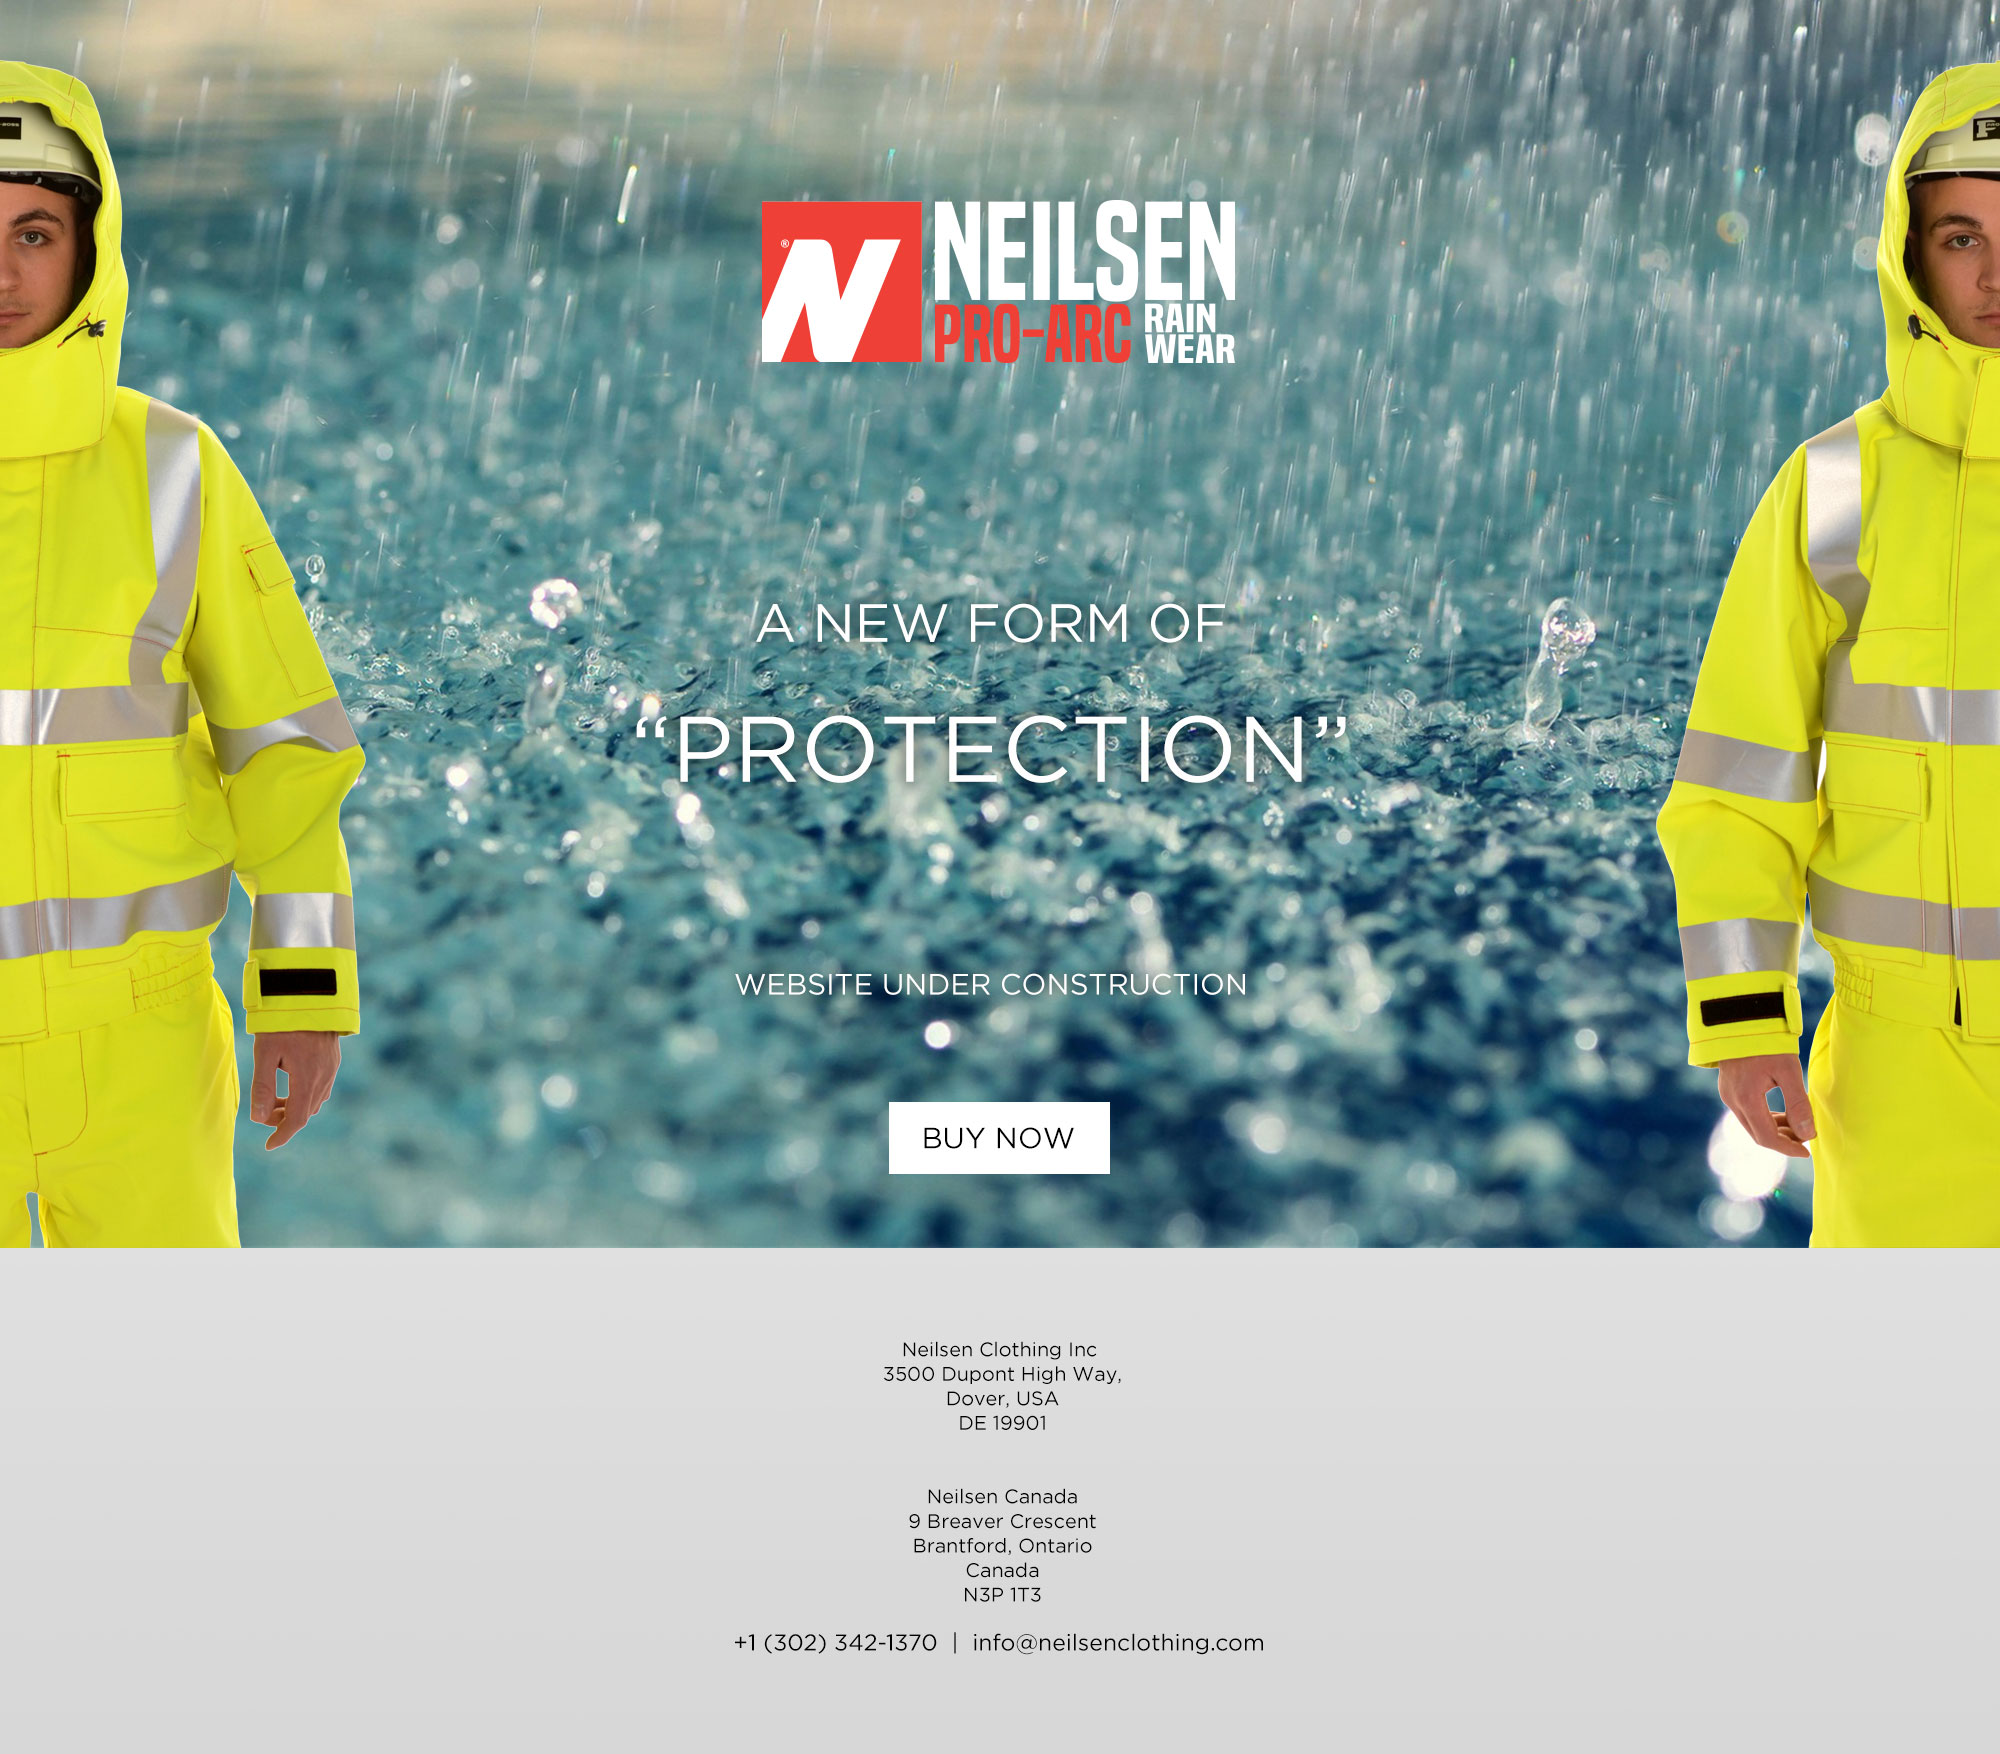 Neilsen Technical Garments engineered with GORE-TEX products "are the only" durably breathable, waterproof and windproof rainwear garments in North America with construction designs unequalled in the industrial market.